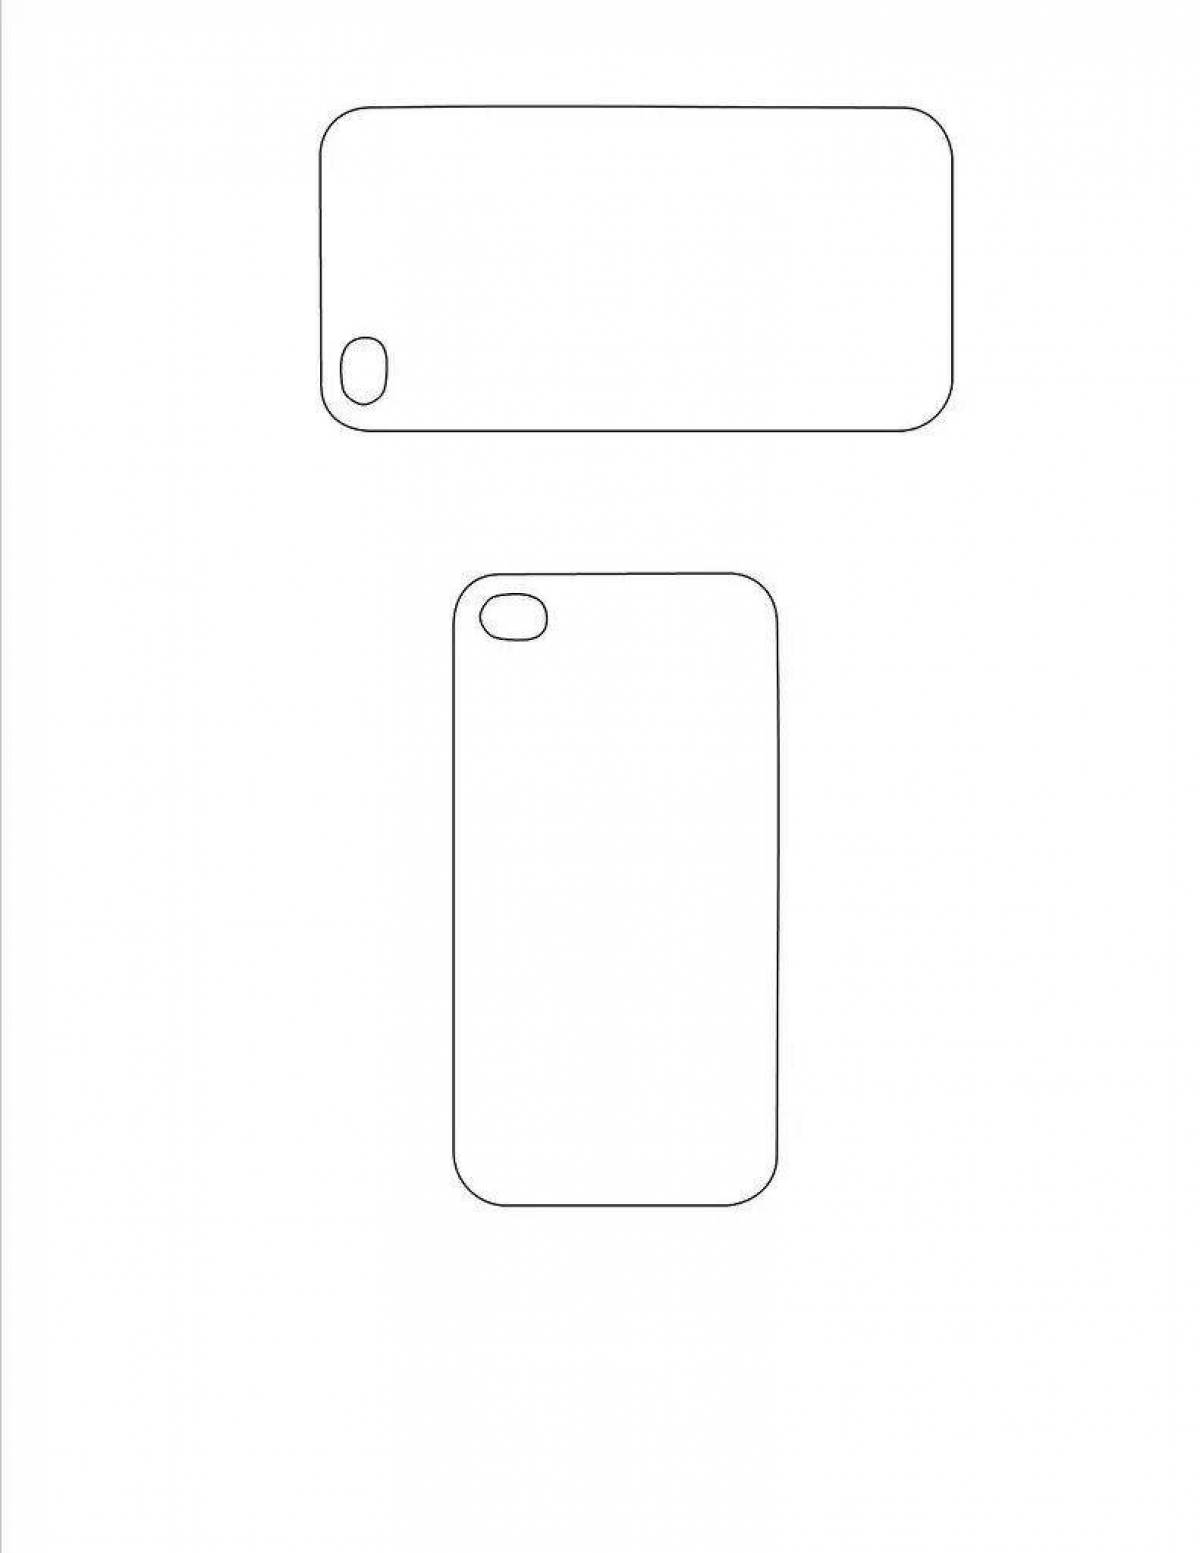 Playful iphone 6 coloring page